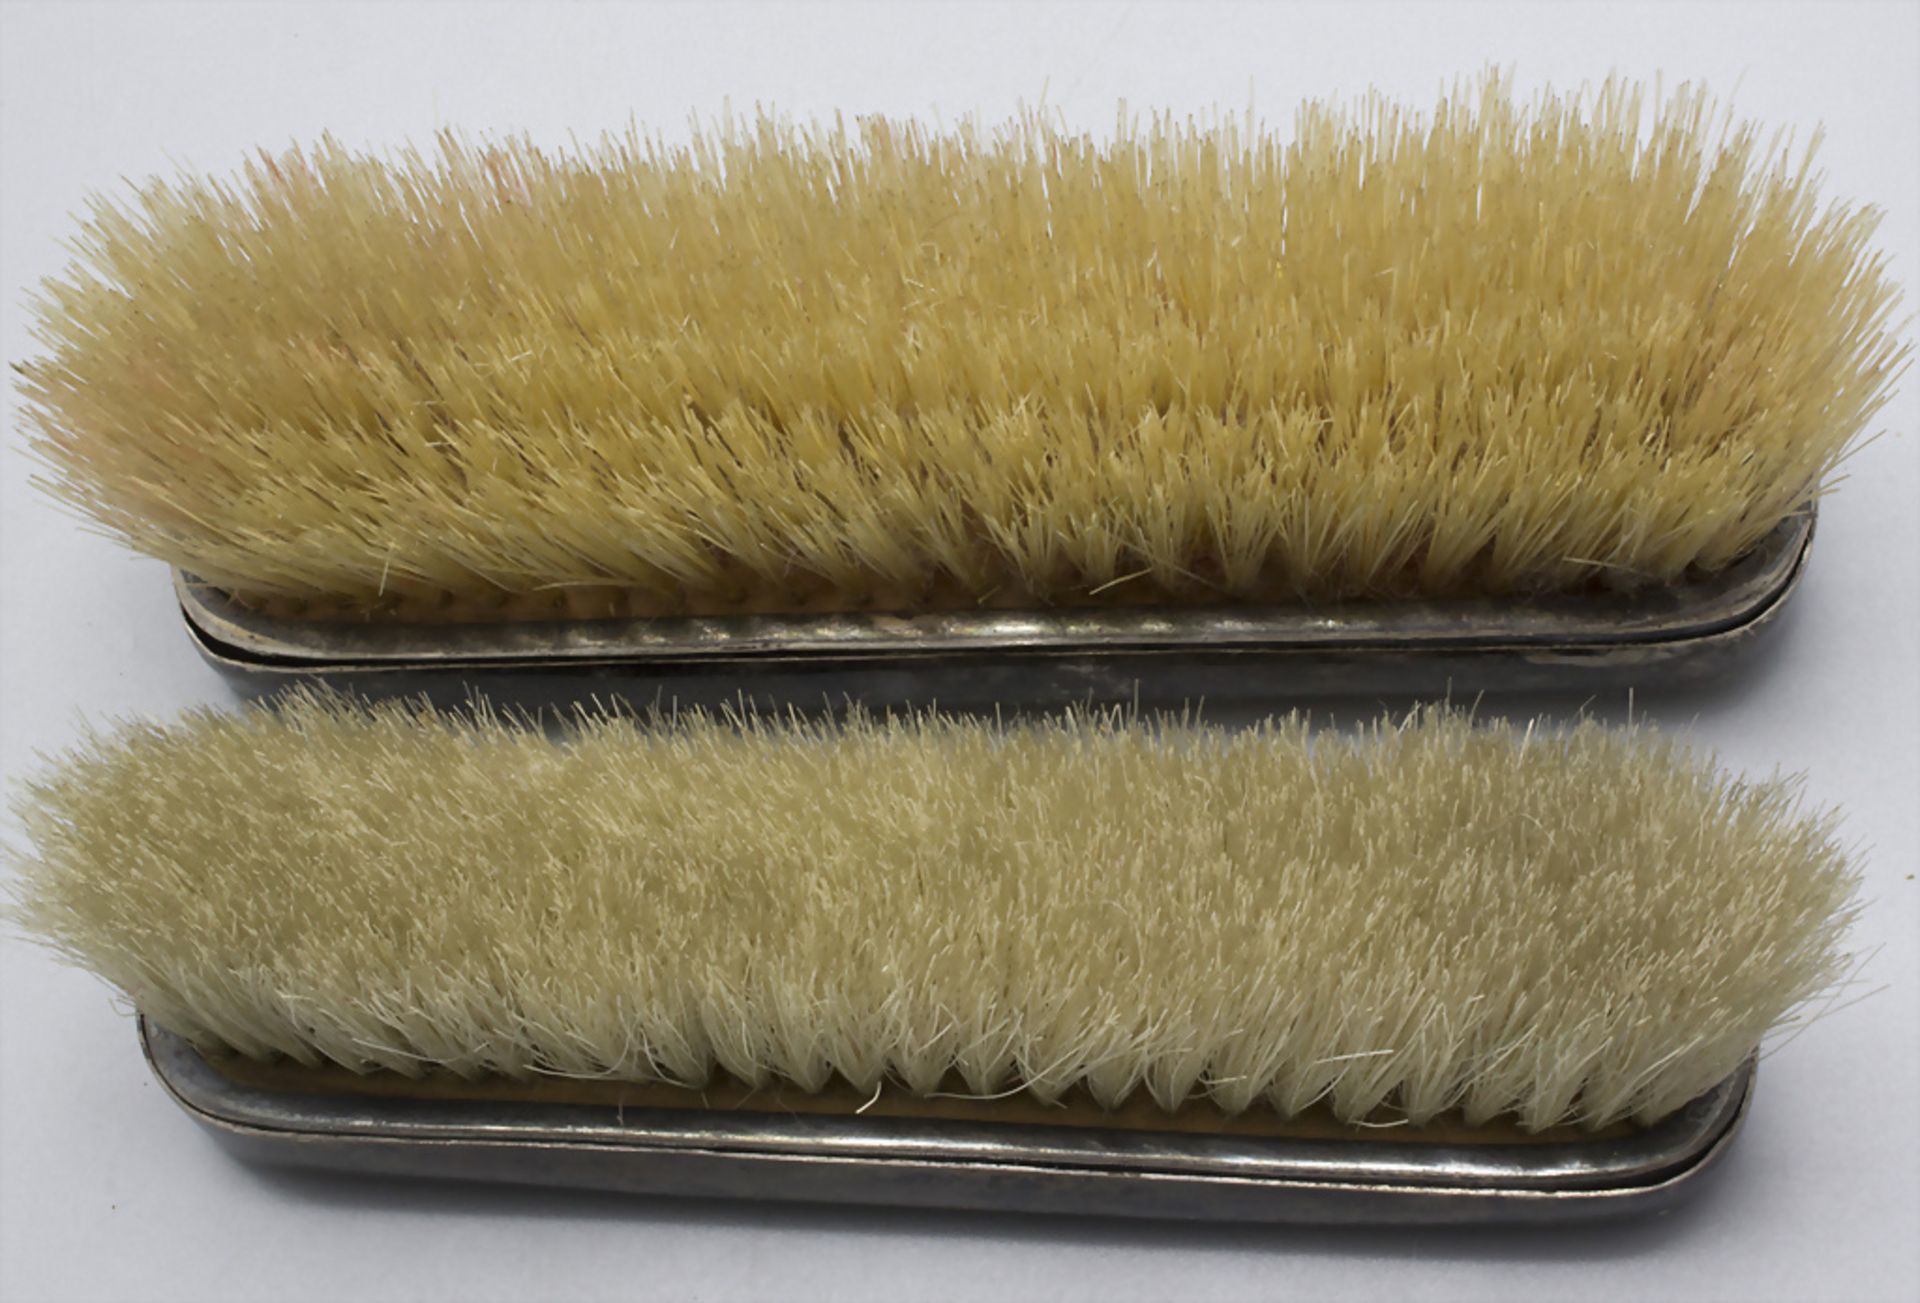 2 Kleiderbürsten / Two clothes brushes, Tuck Chang & Co., Shanghai, um 1900 - Image 3 of 5